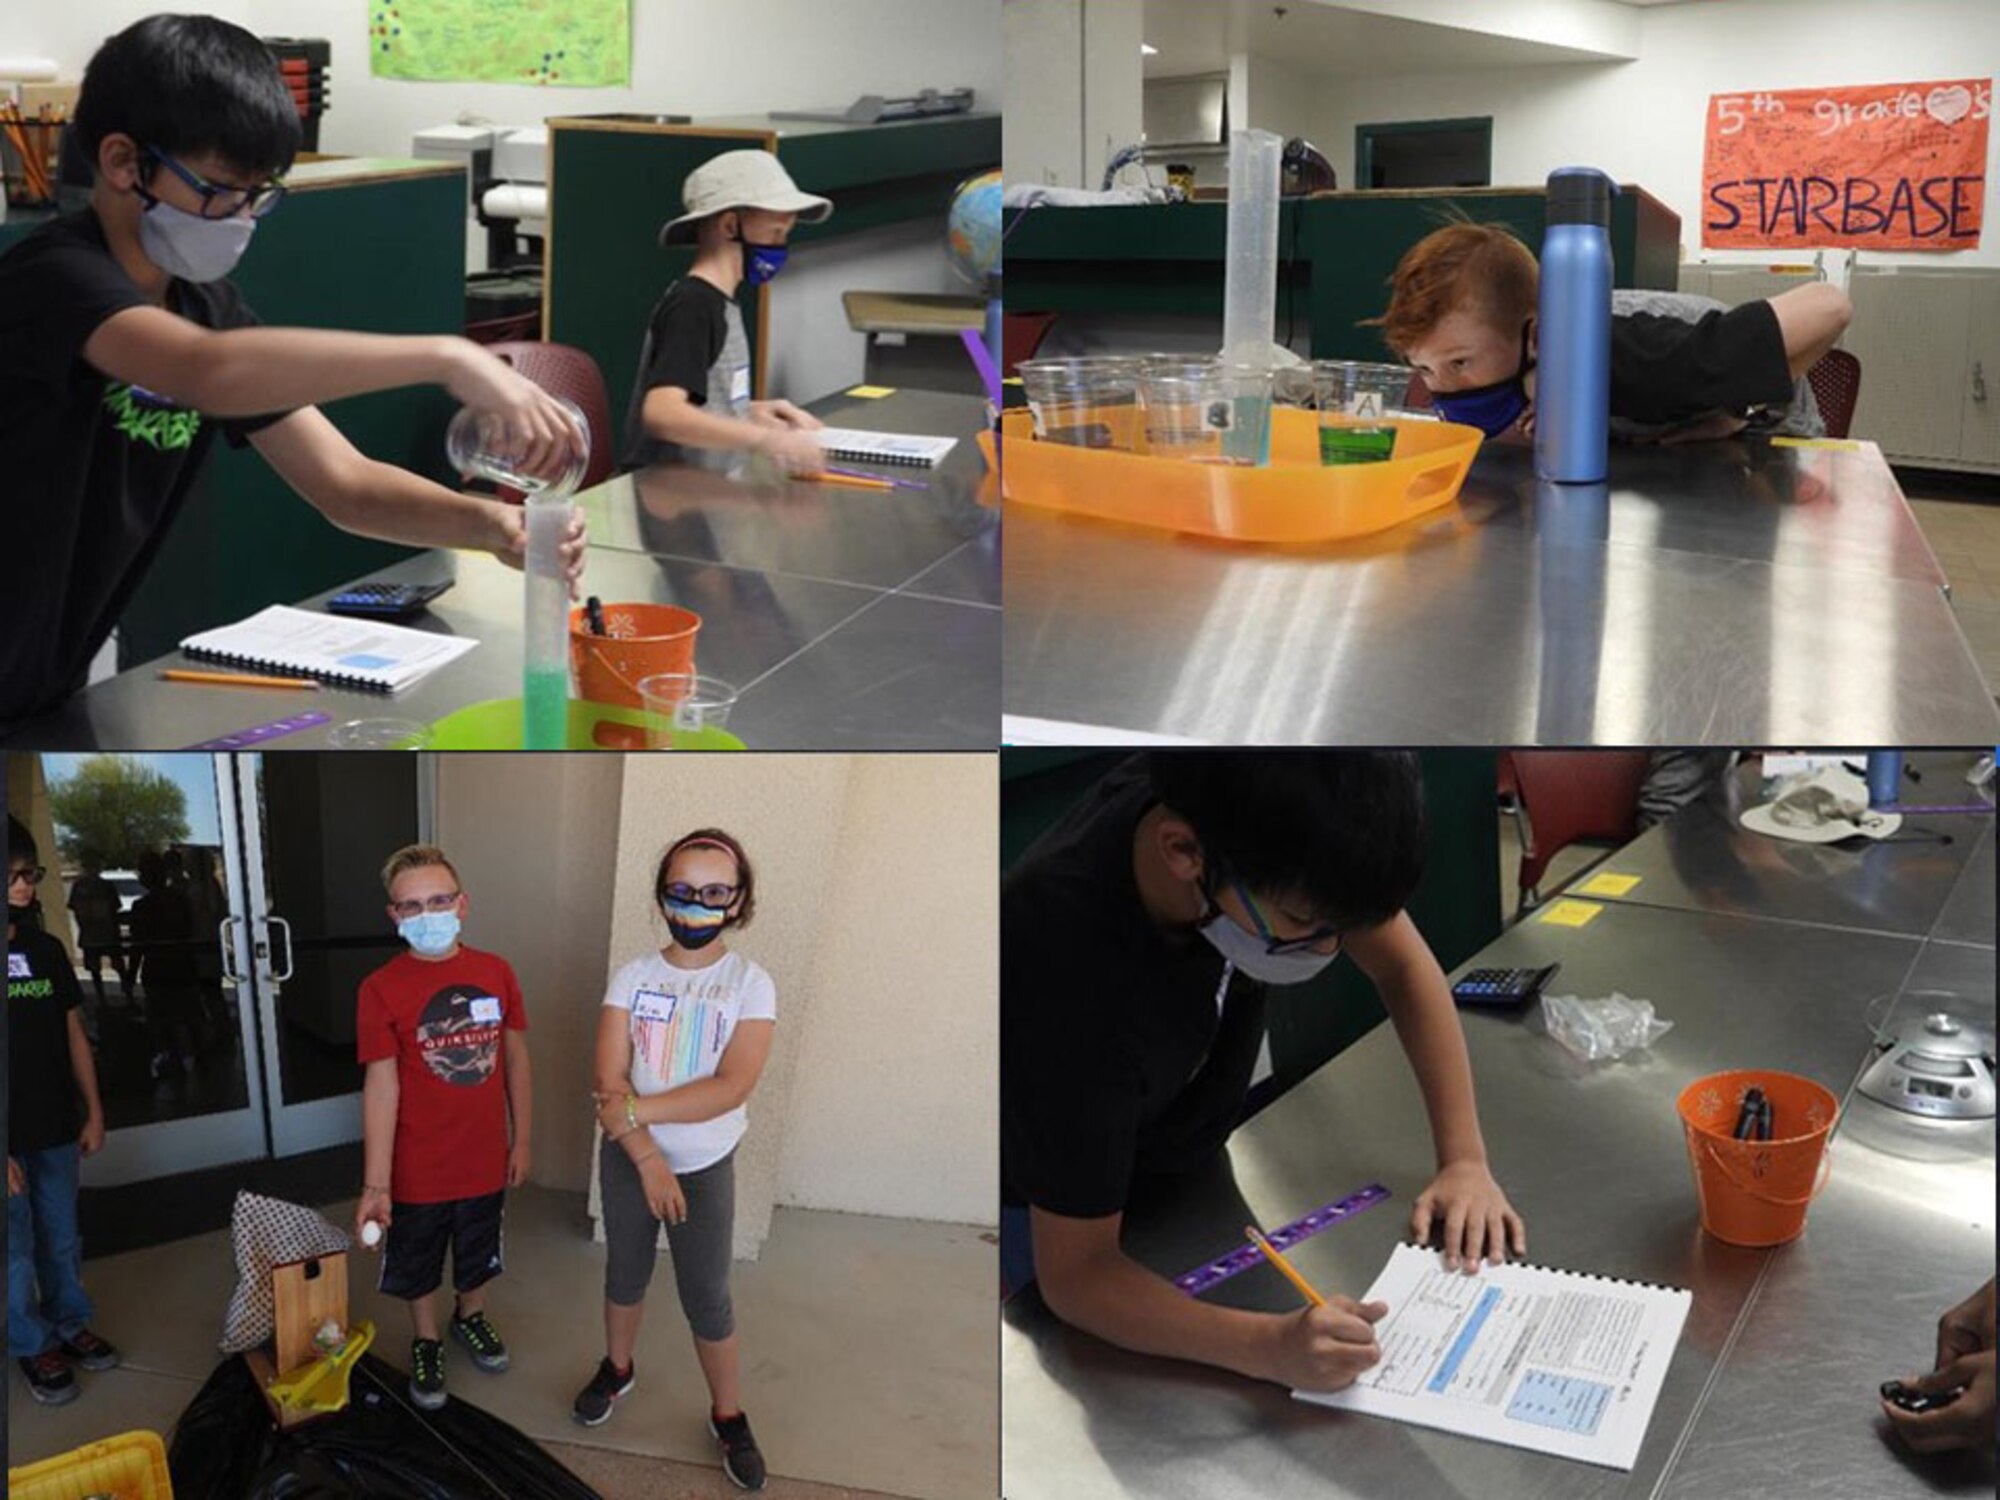 STARBASE Nellis re-opened with their summer academy program July 20, 2020, at Nellis Air Force Base, Nevada. Students from the local Las Vegas area participate in hands-on science, technology, engineering and math (STEM) training. (Courtesy Photo)